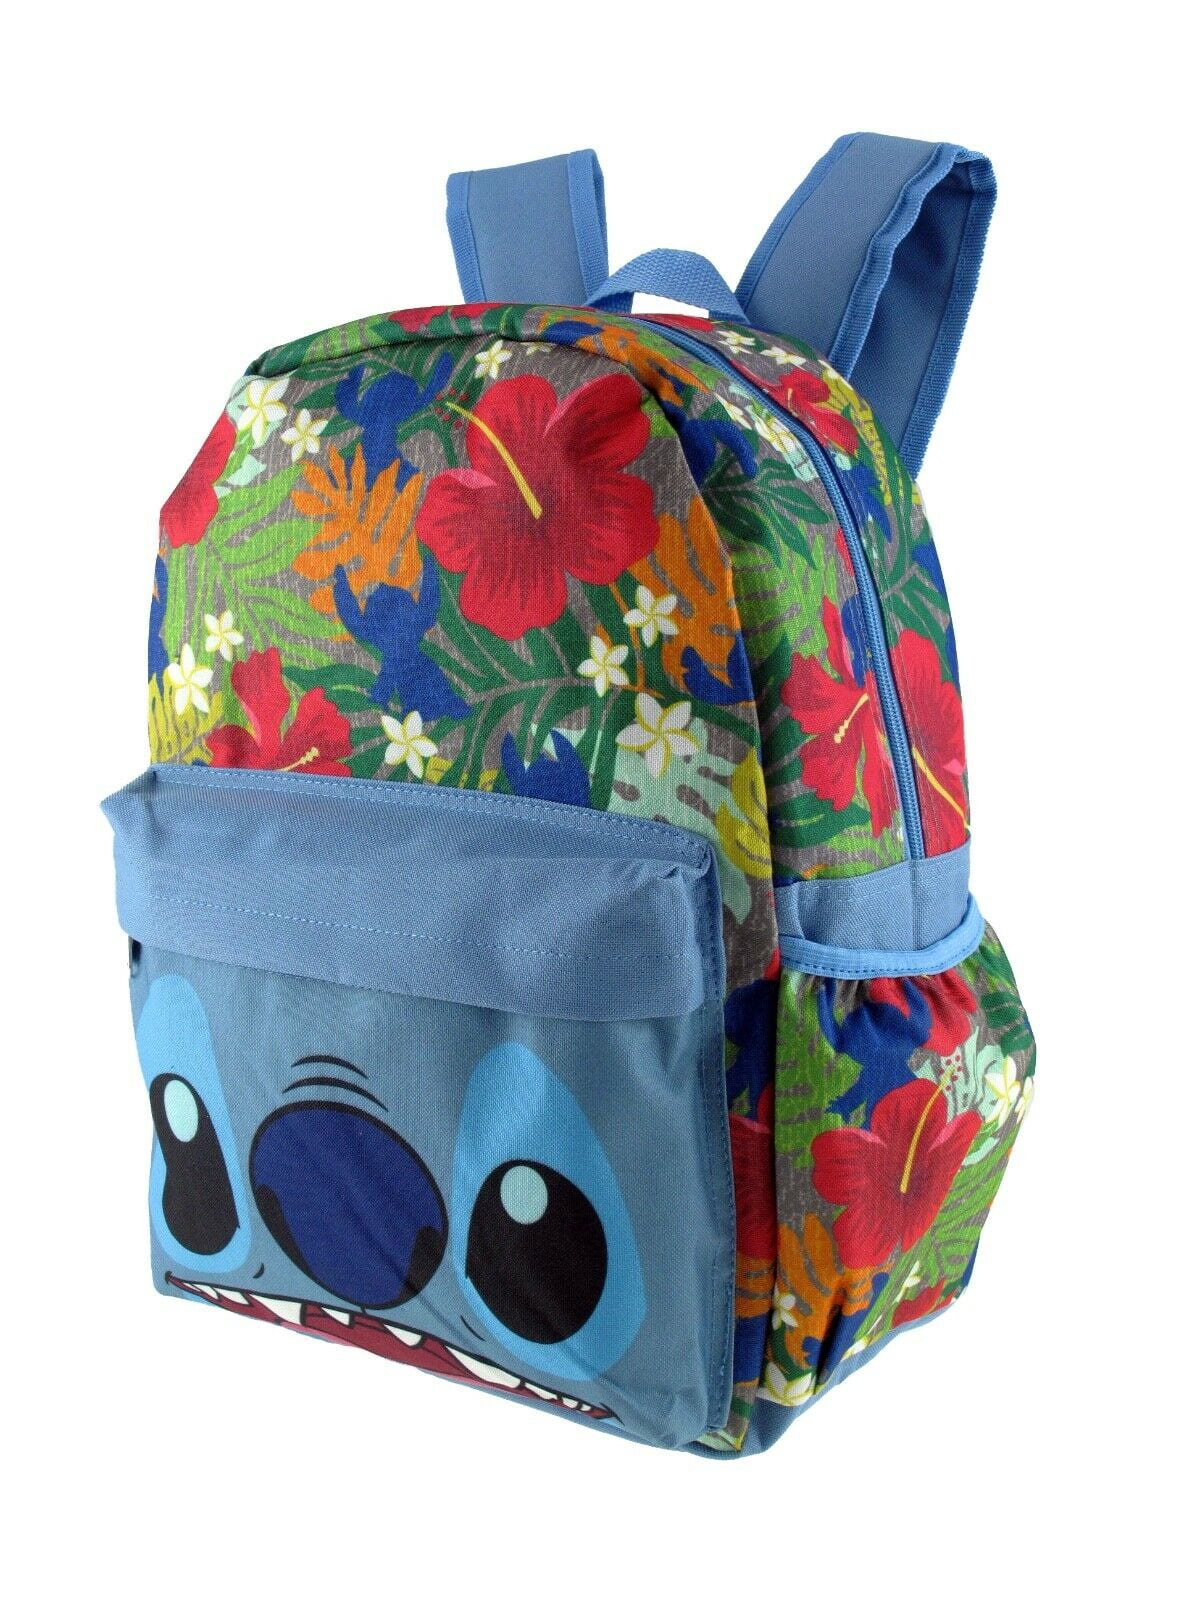 Disney Lilo And Stitch 4 Piece Backpack Girls | Kids Boys Alien Character  3D Ears Rucksack Lunch Bag Pencil Case And Water Bottle | Back to School  Bag